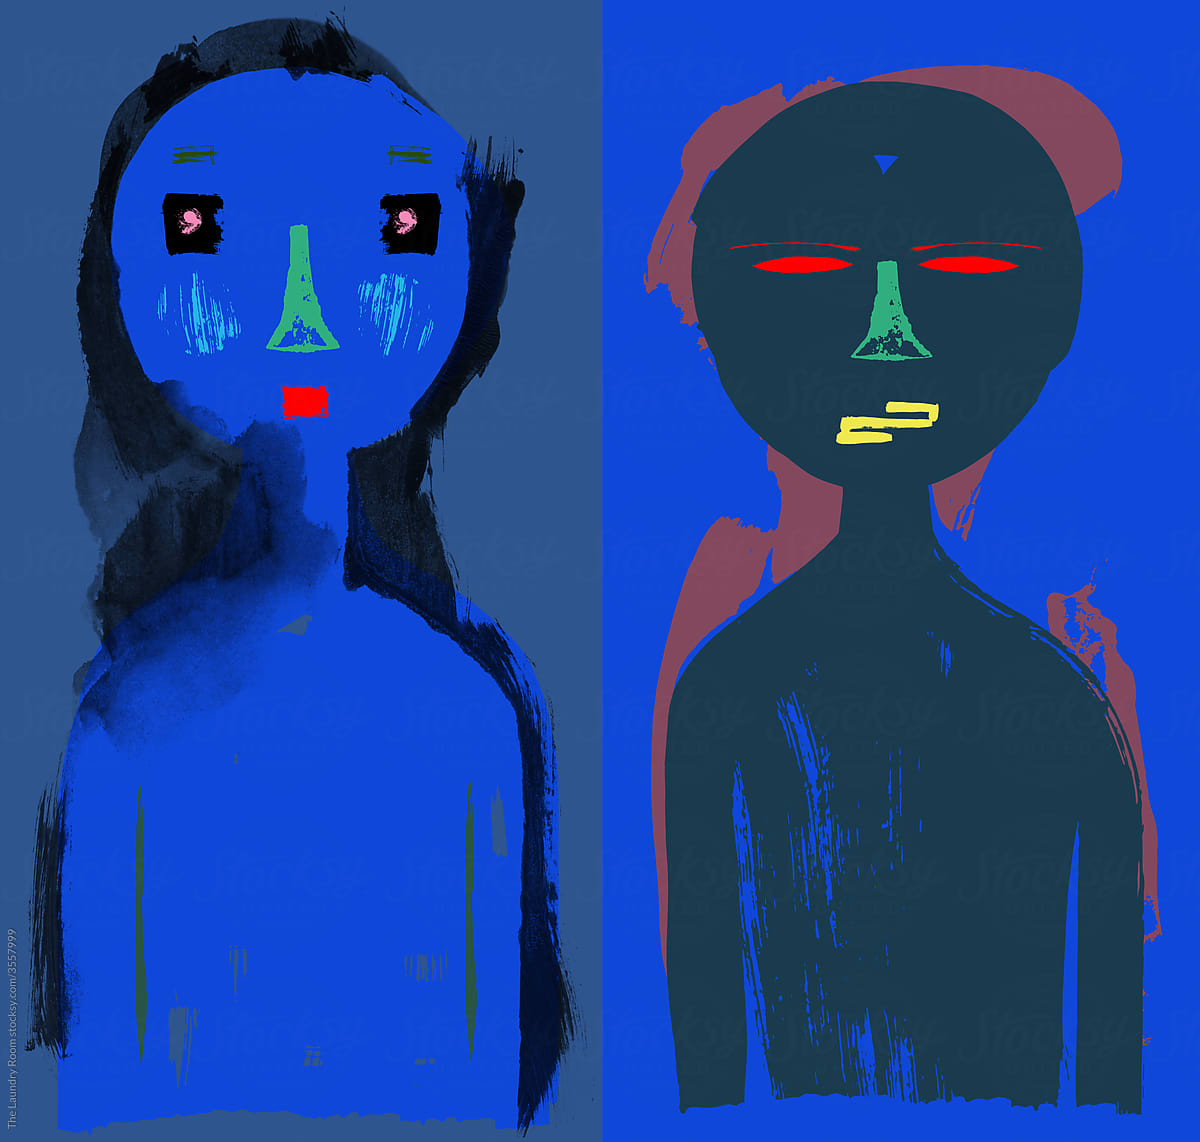 The Blue Couple - Stylized Illustration of Two People